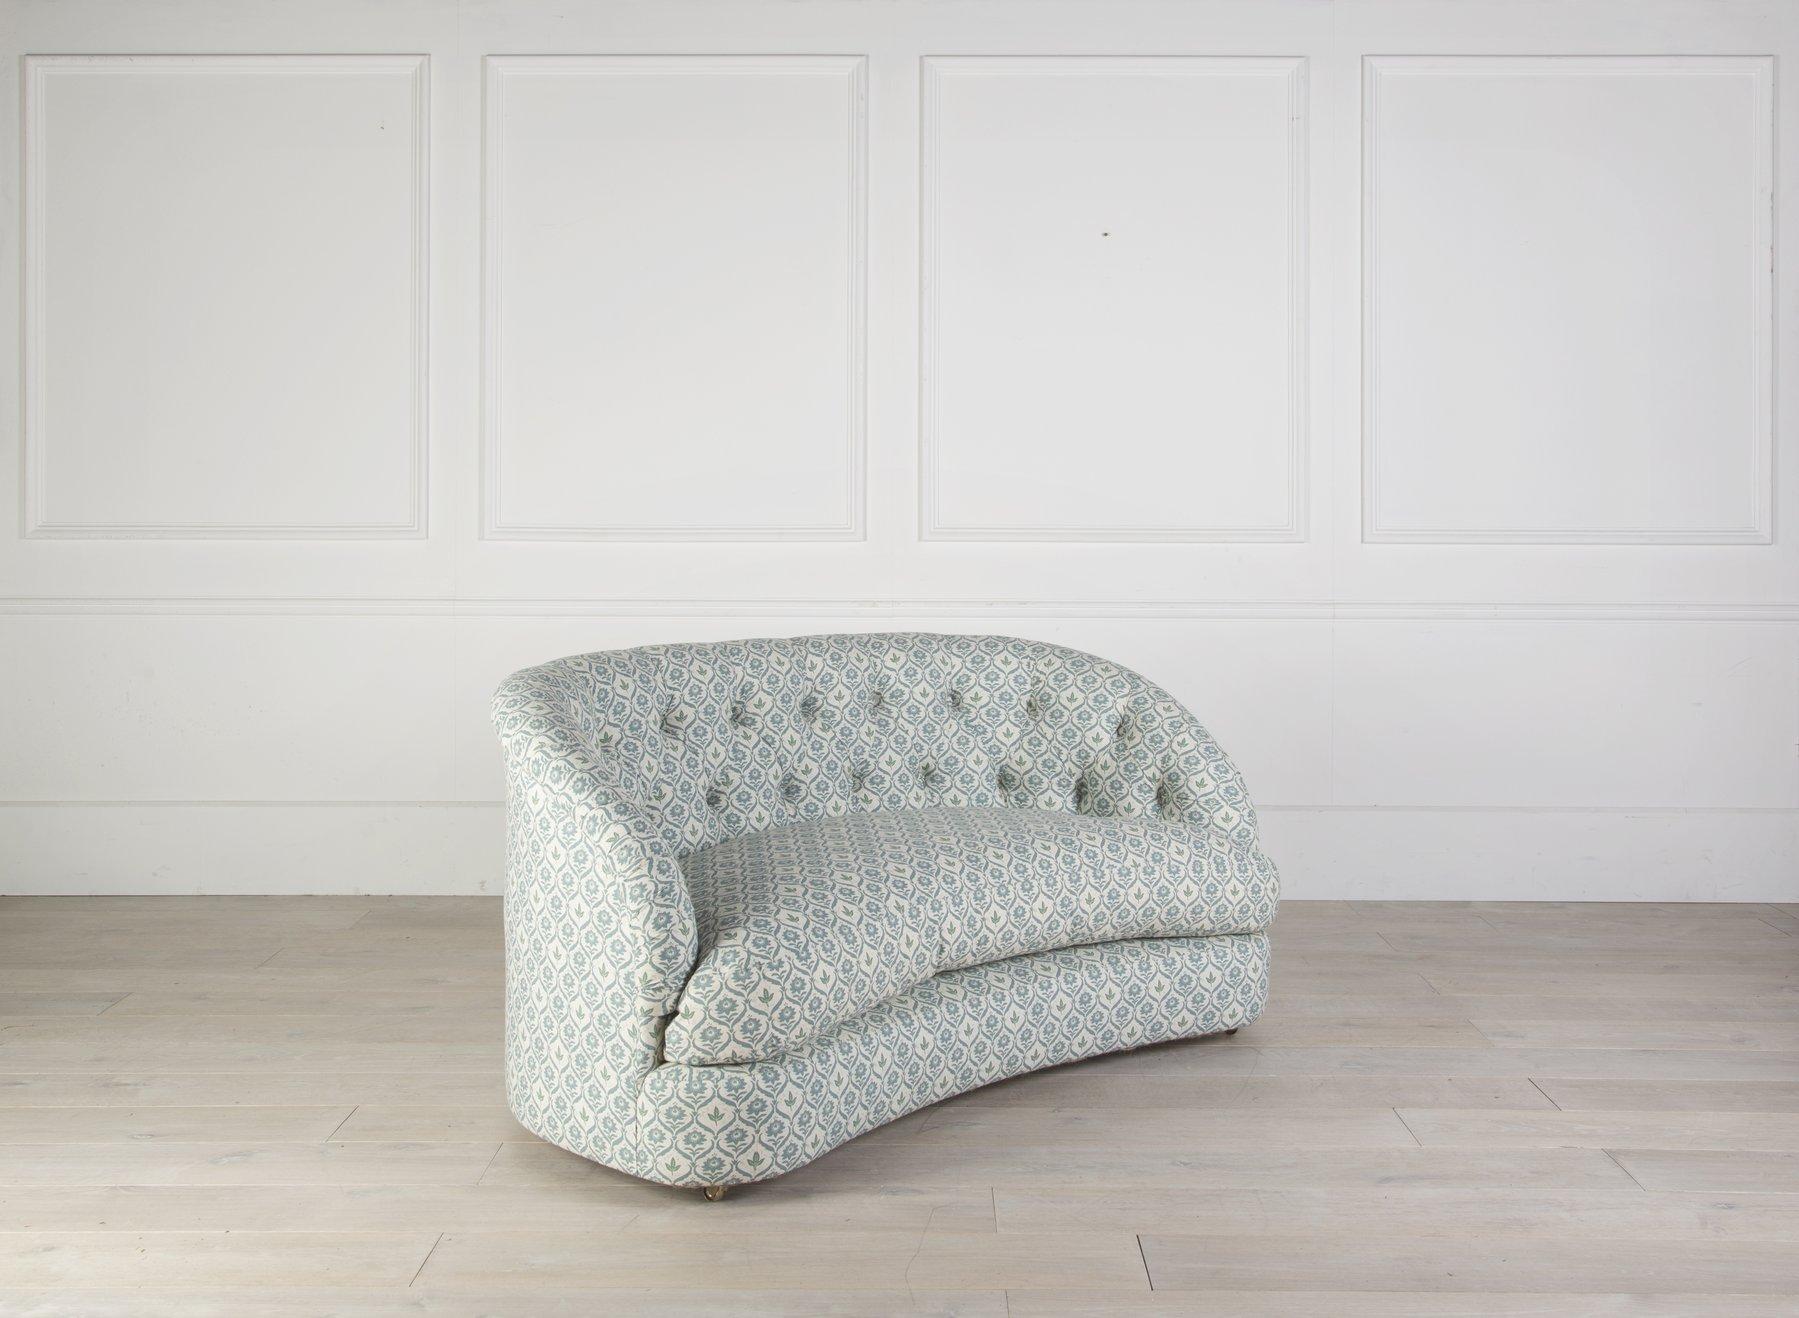 Made to order from our Bespoke Upholstery collection, The Portobello is based on a rare Howard & Son’s frame. With its clean, curving lines, this sofa doesn’t feel committed to standing against a wall, it works just as well freely spaced. The deep